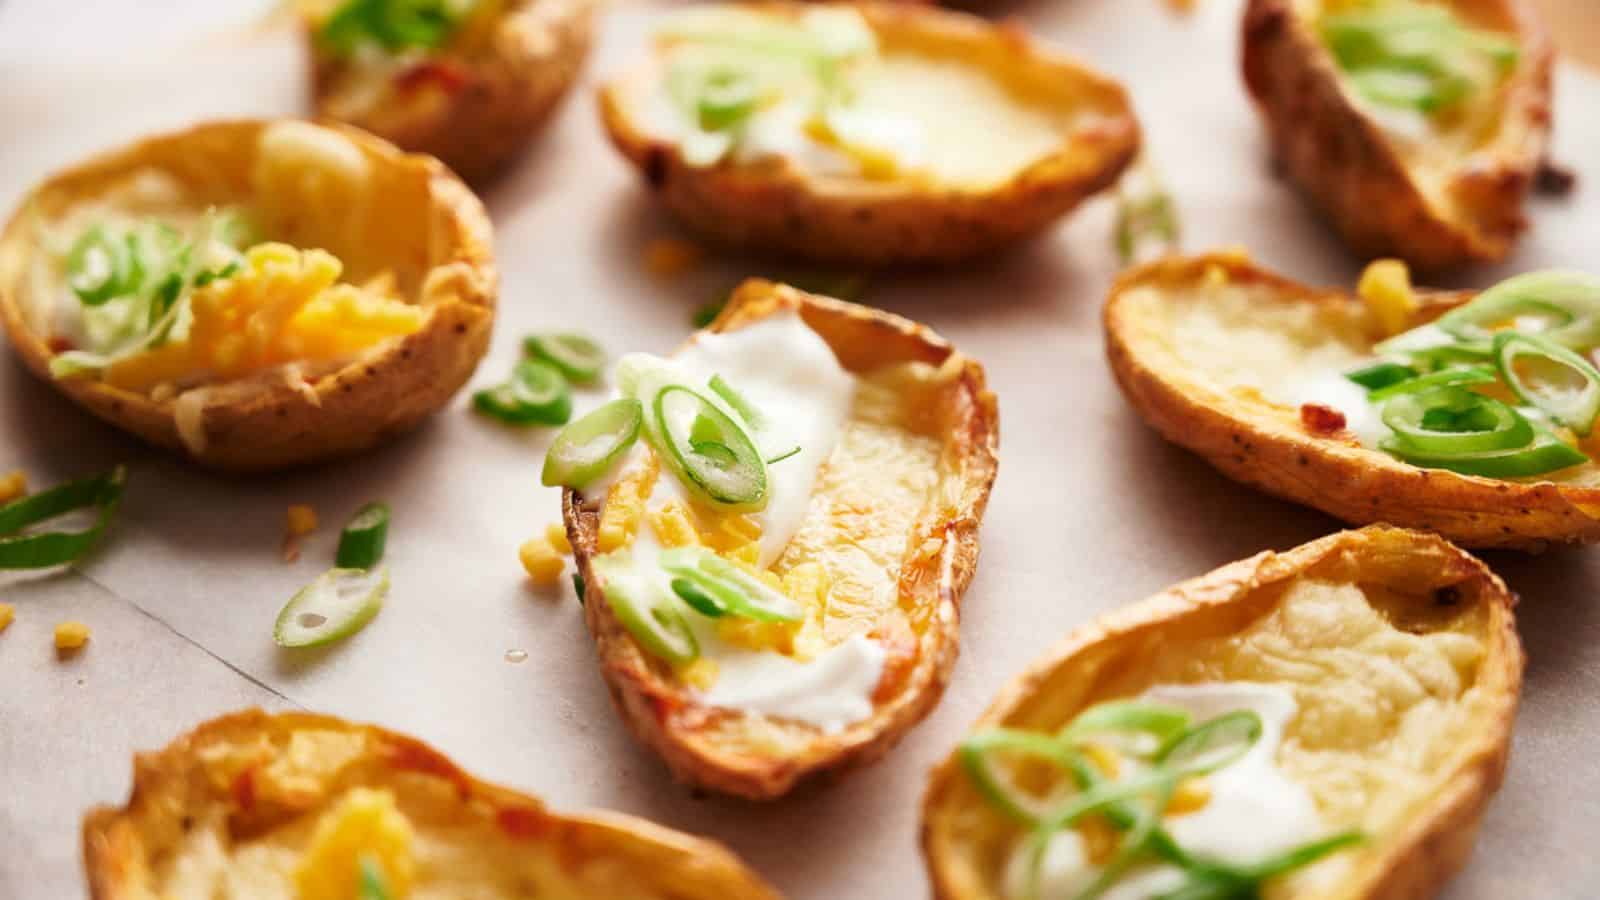 <p>With the convenience of an air fryer, potato skins become a simple and delicious appetizer or side. They are cooked to a perfect crispness and ready to be filled with your favorite toppings.<br><strong>Get the Recipe: </strong><a href="https://www.splashoftaste.com/air-fryer-potato-skins/?utm_source=msn&utm_medium=page&utm_campaign=msn">Air Fryer Potato Skins</a></p>